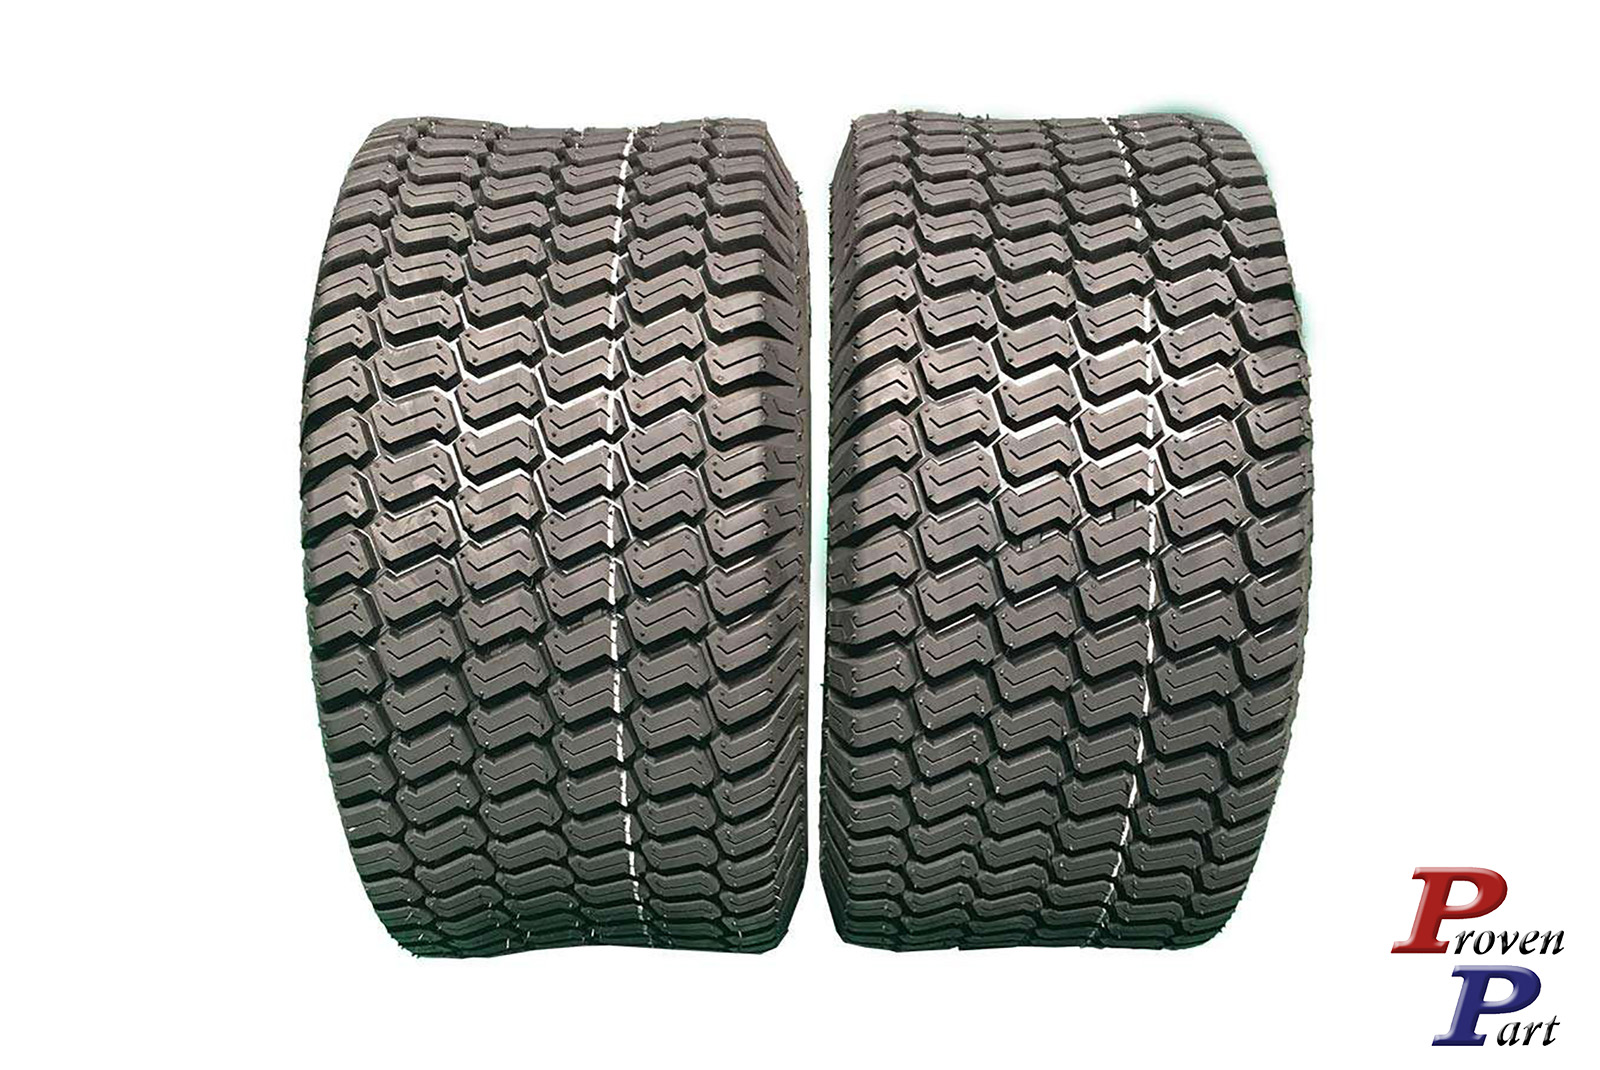 Set of 2 riding mower tubeless 4 ply tires 18x9.50-8 - Click Image to Close